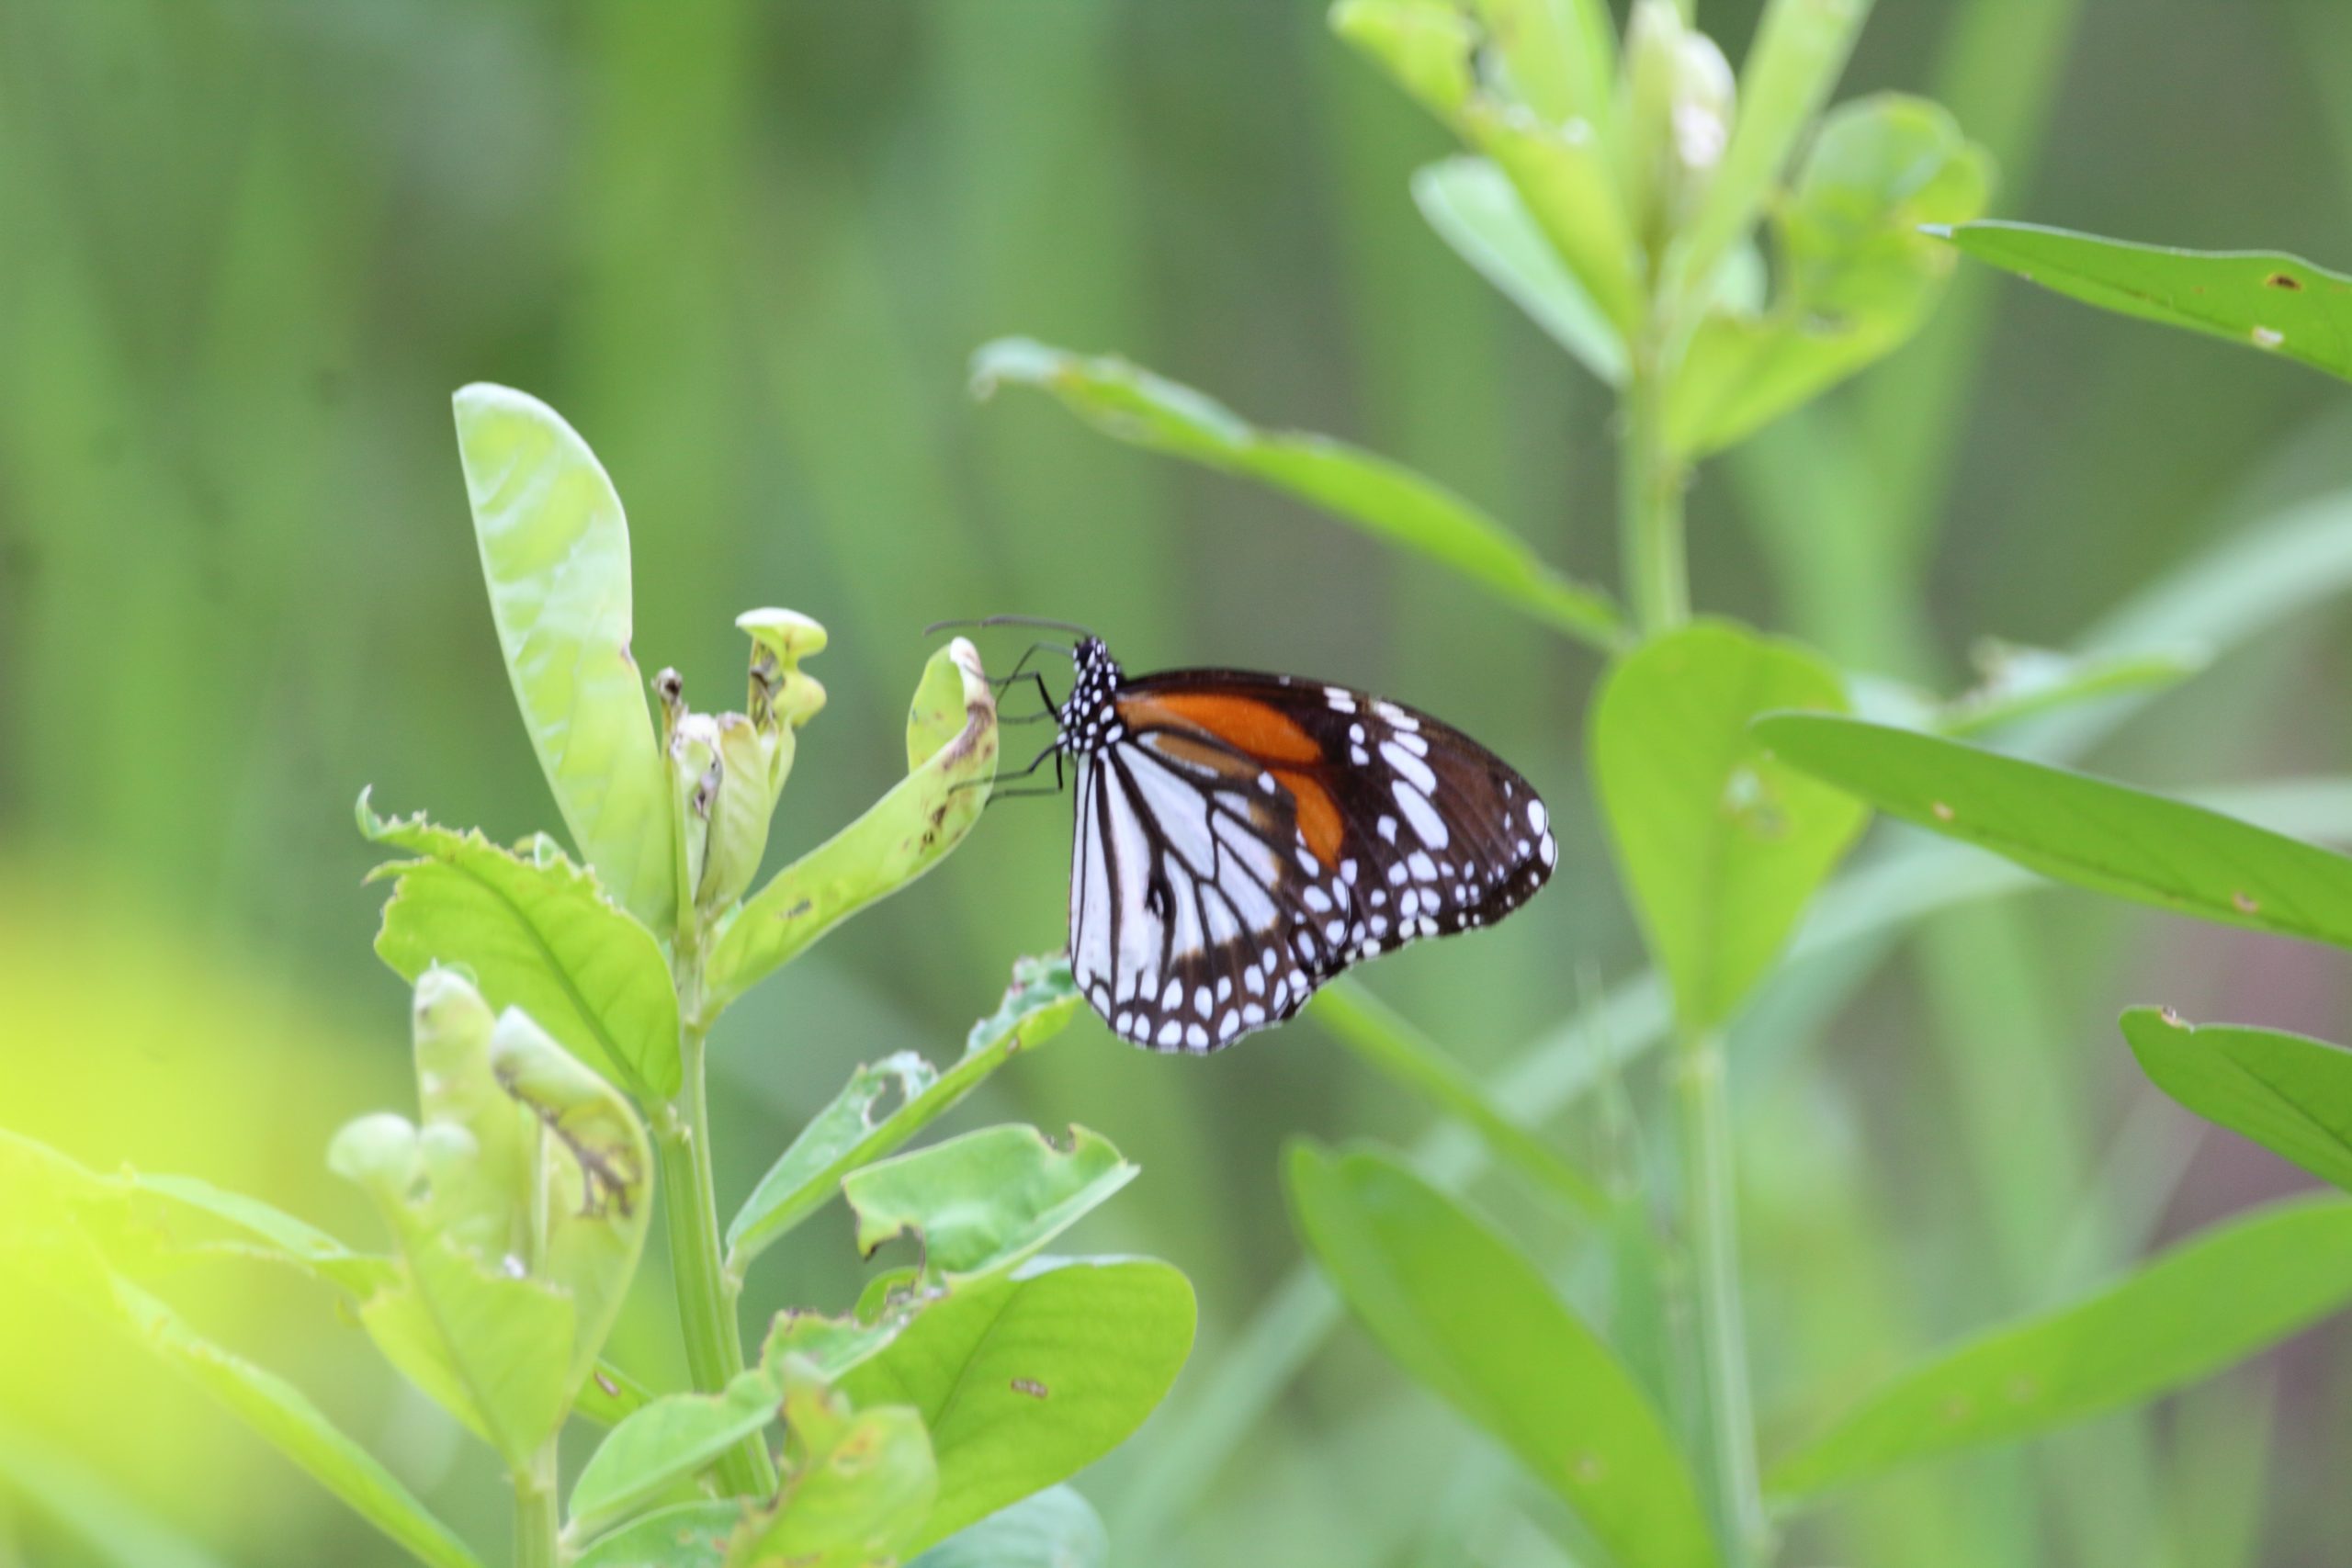 Monarch butterfly on a plant.